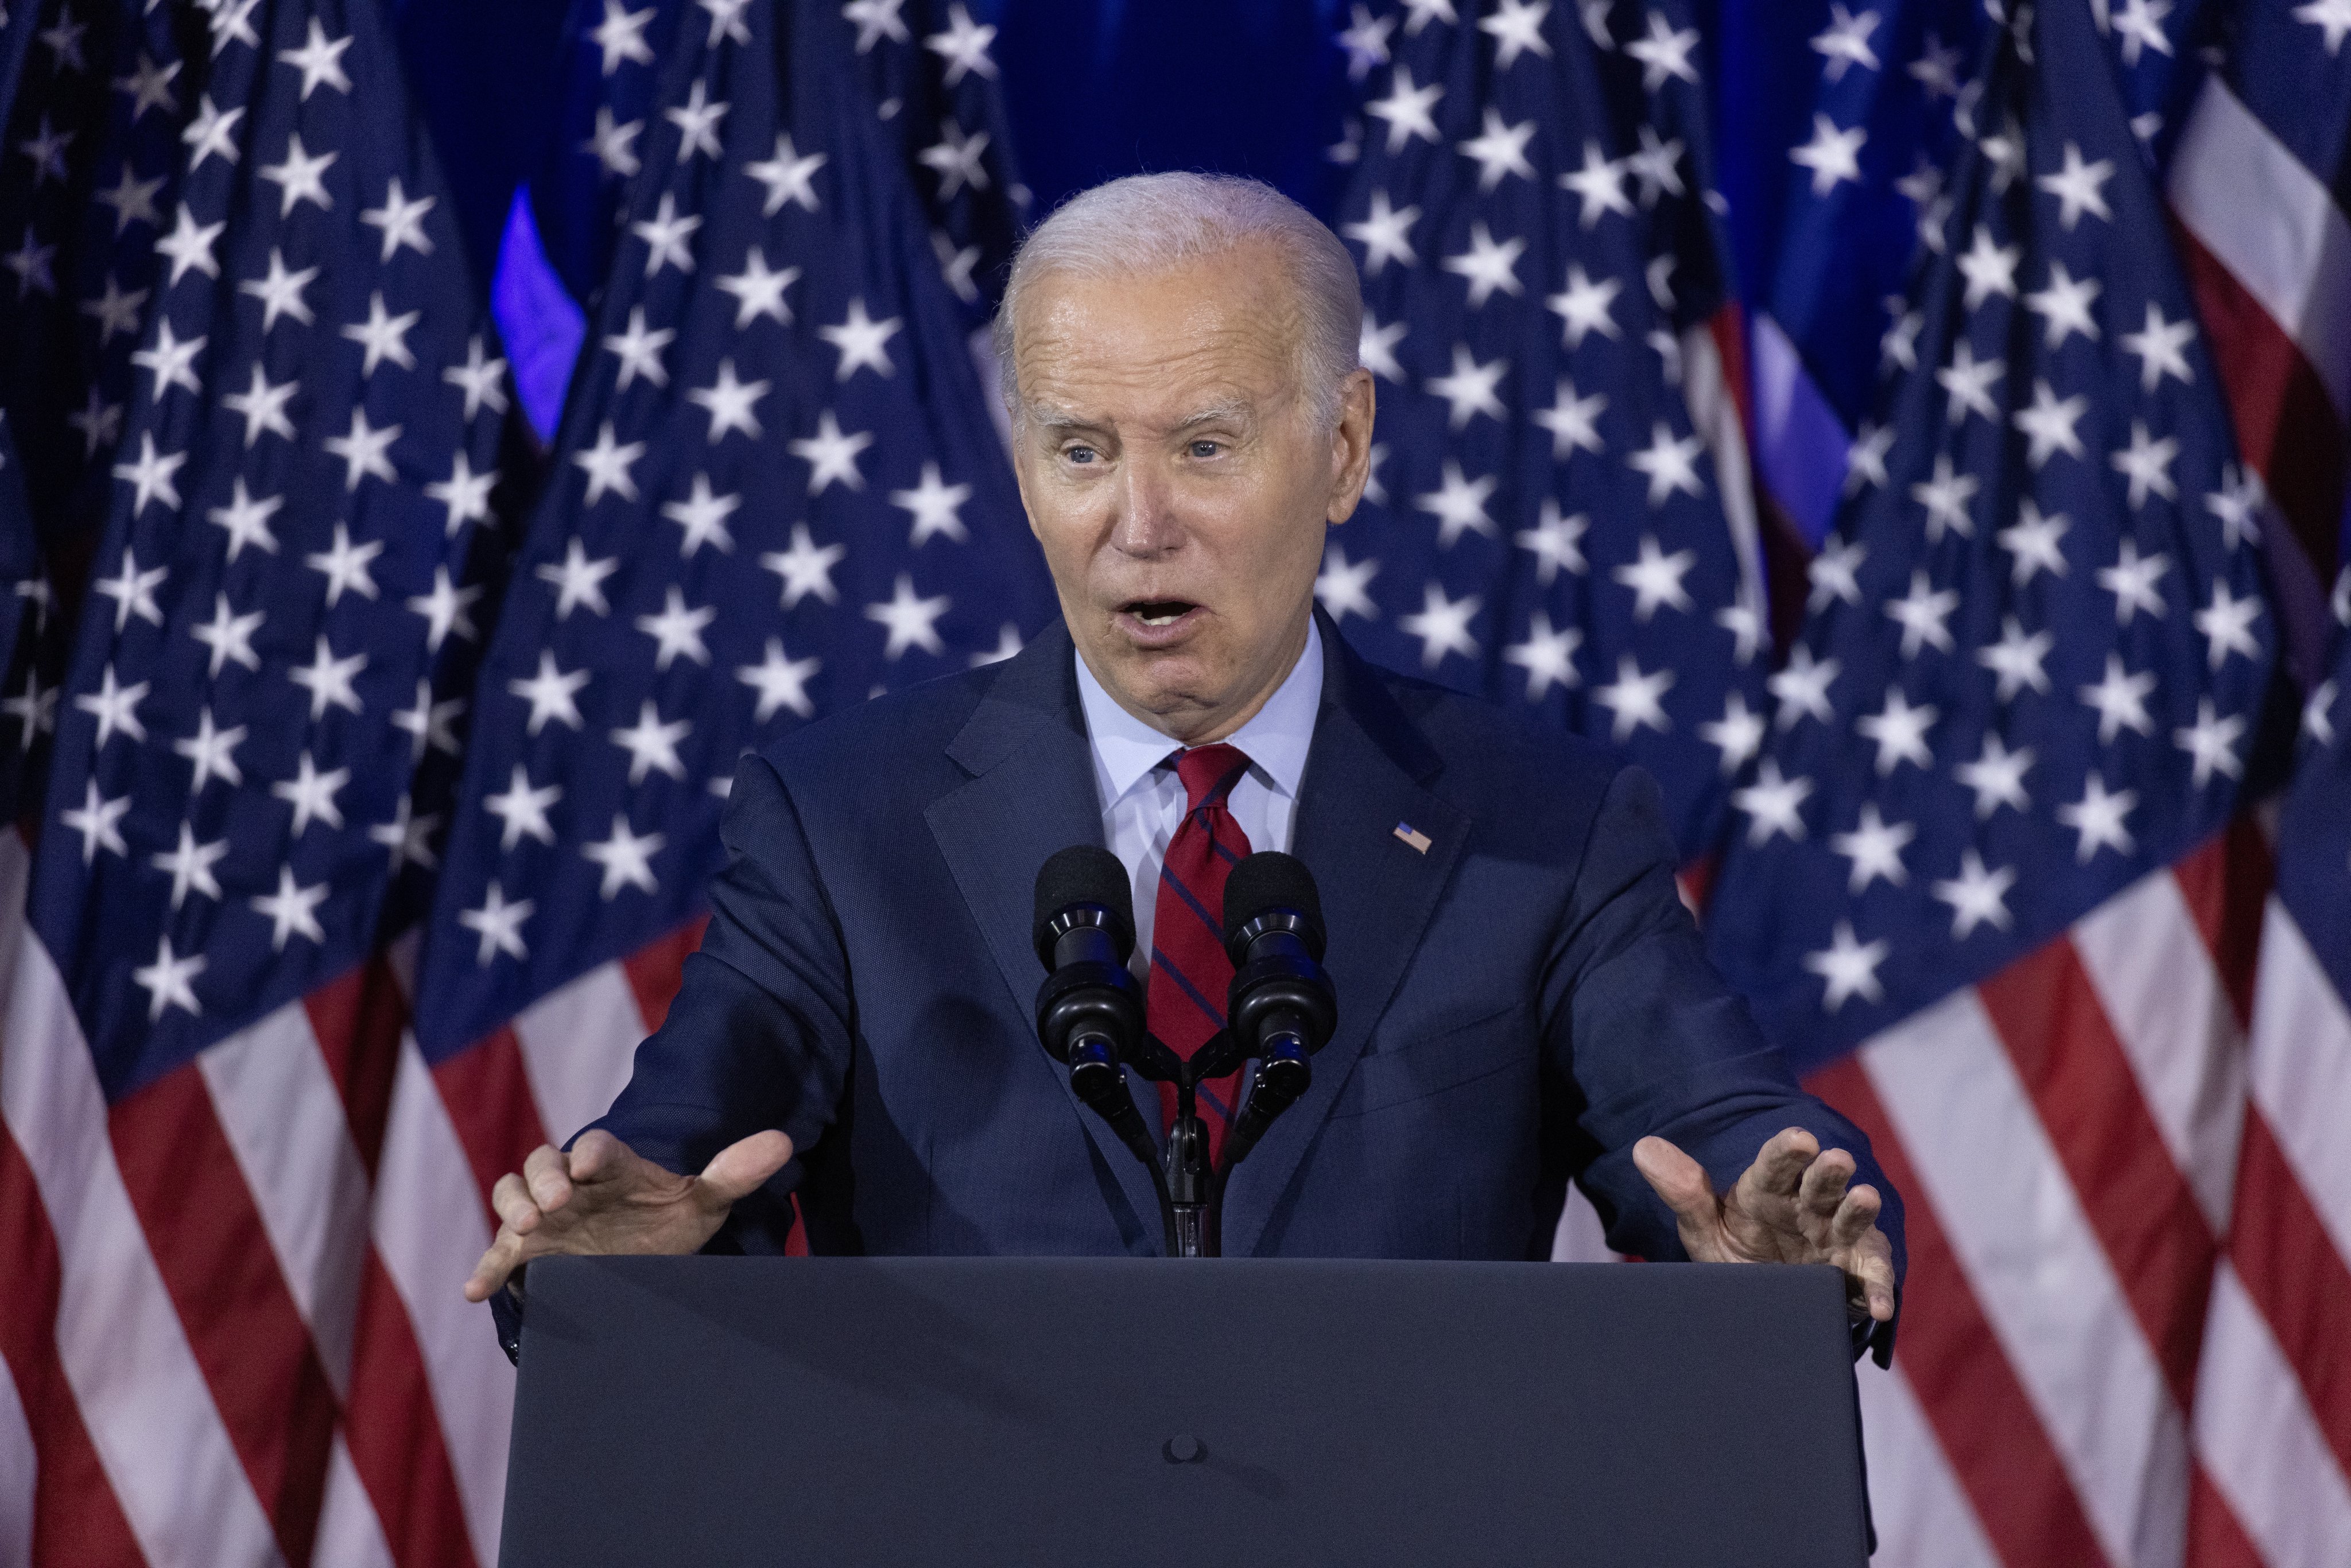 US President Joe Biden speaks during a political event on reproductive rights in Washington, US on Saturday. Photo: EPA-EFE